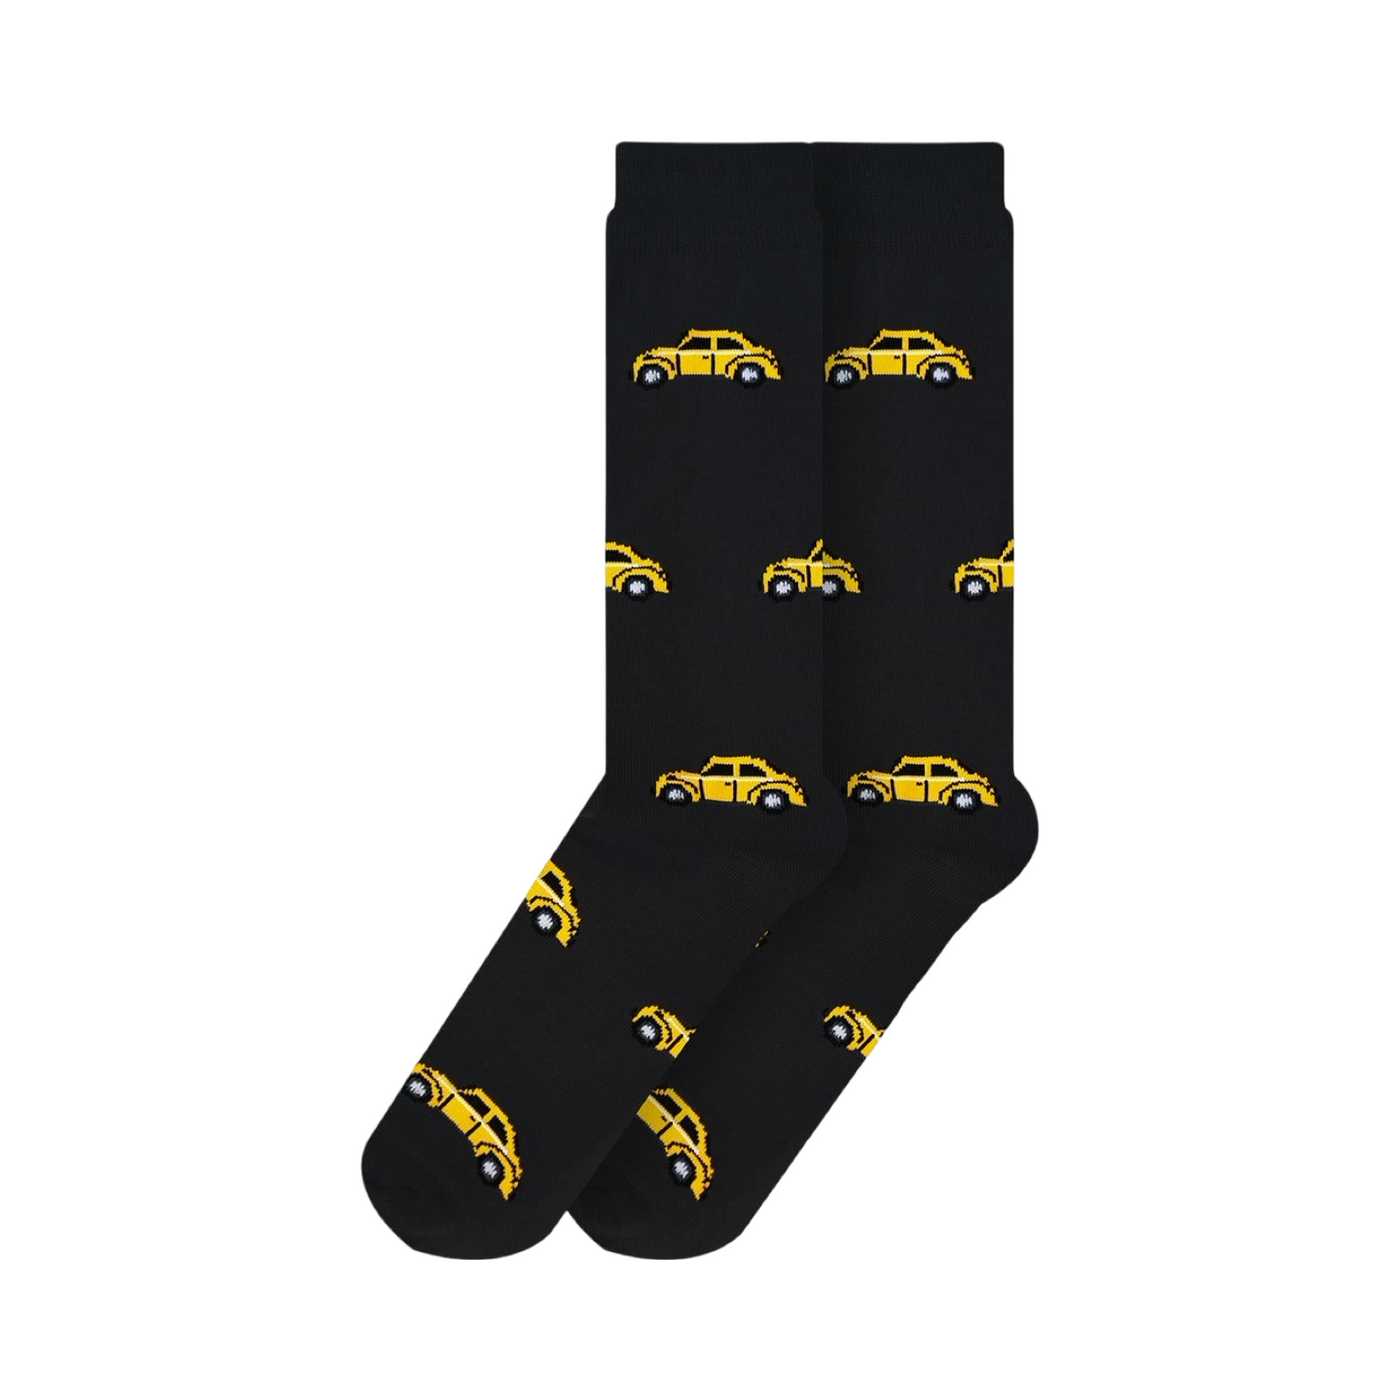 Pair of black socks with yellow VW bugs.